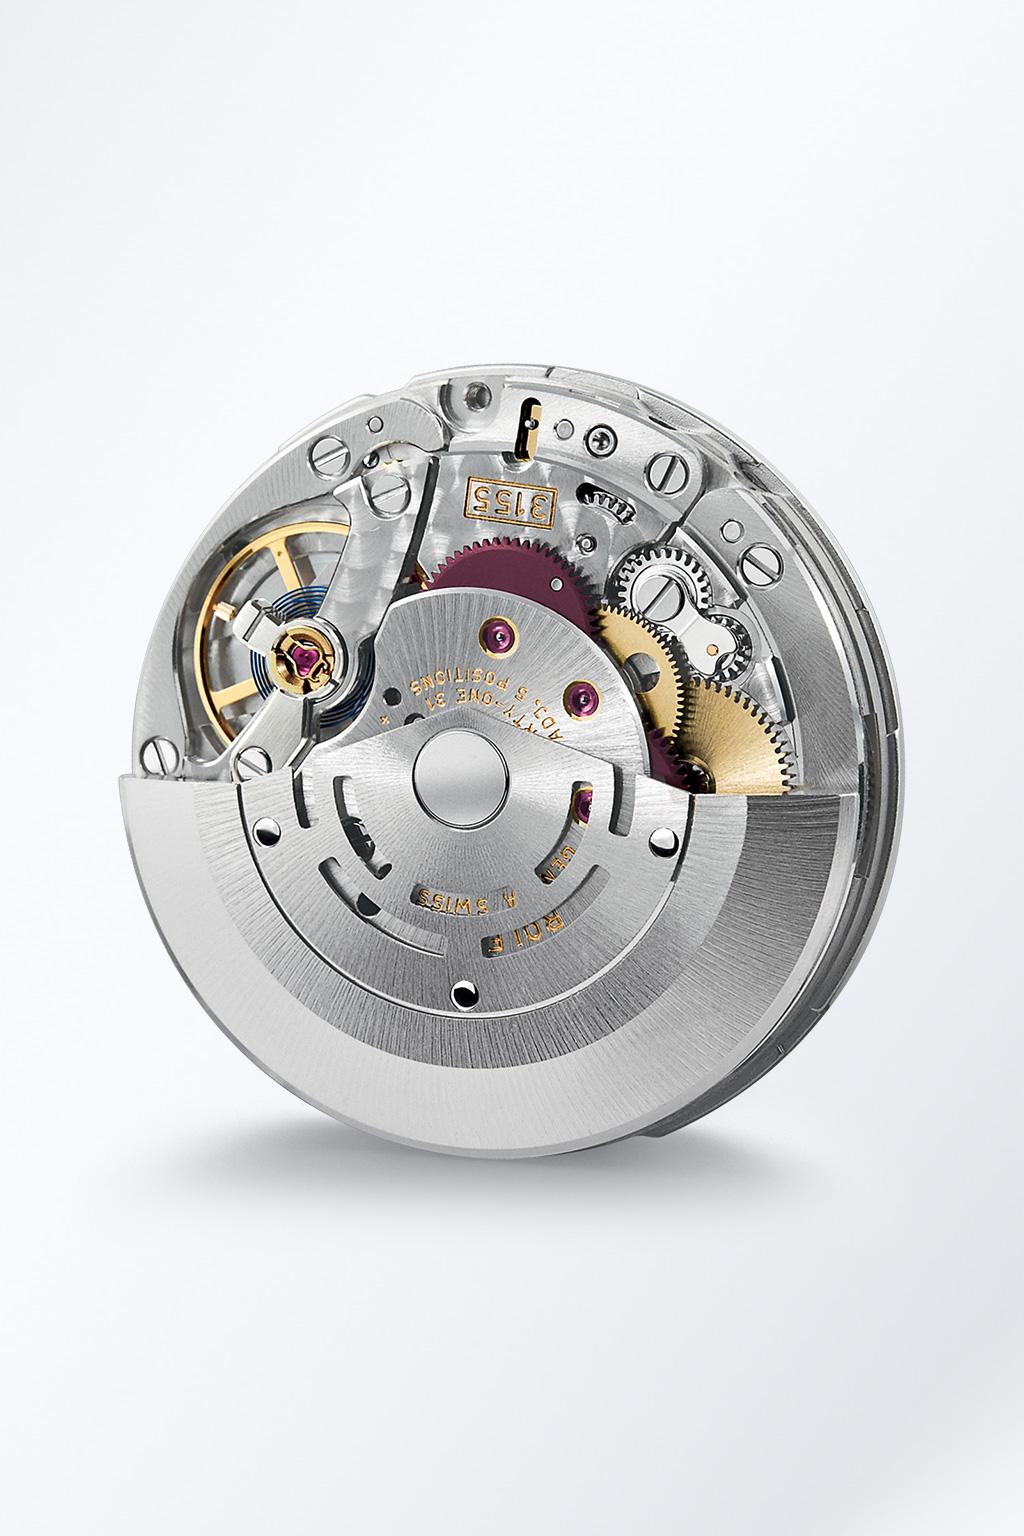 Features 3155 MOVEMENT The Day-Date 36 is equipped with calibre 3155, a self winding mechanical movement entirely developed and manufactured by Rolex.